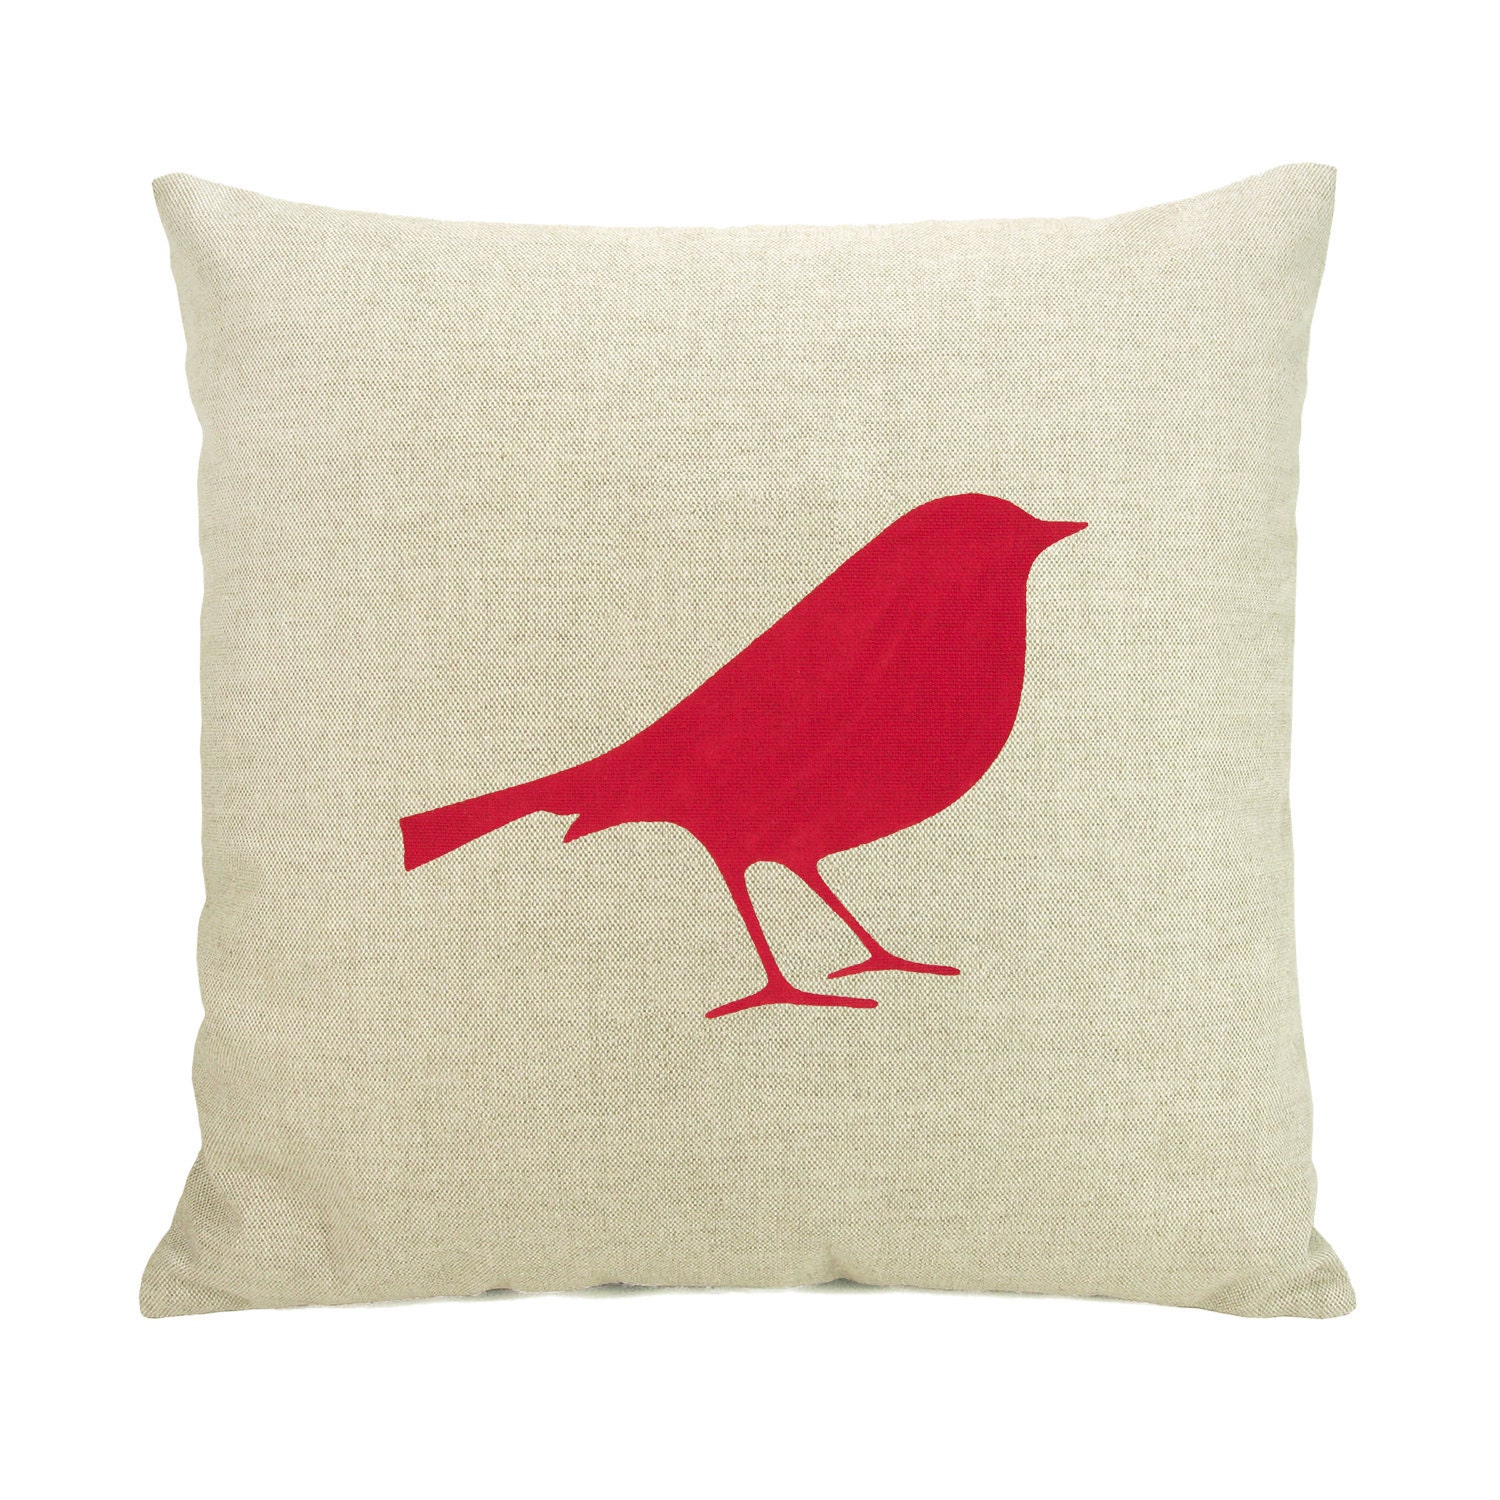 Bird pillow cover -  Red bird print on natural beige canvas throw pillow cover - 16x16 decorative pillow cover - ClassicByNature